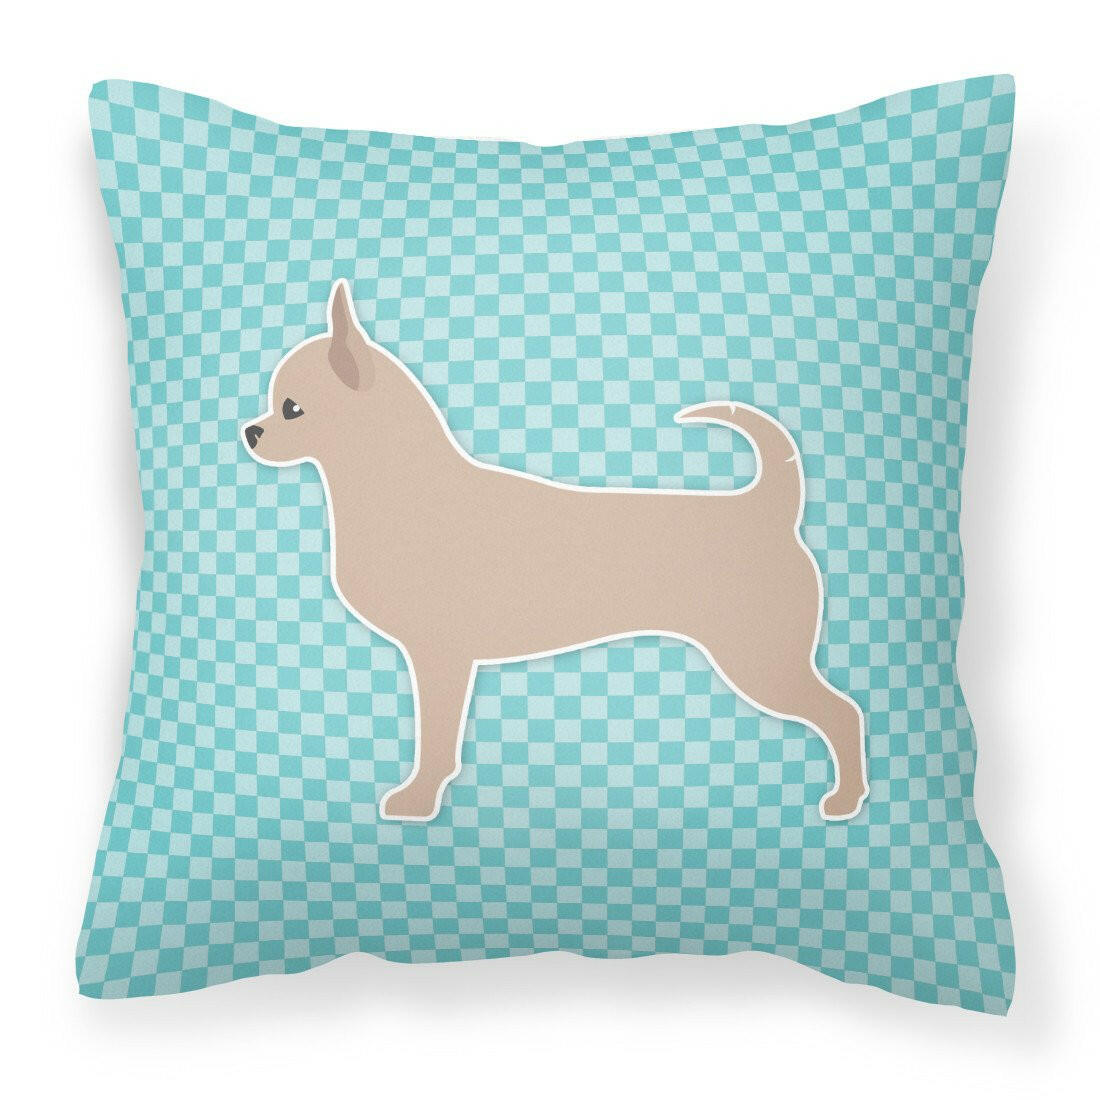 Chihuahua Checkerboard Blue Fabric Decorative Pillow BB3750PW1818 by Caroline's Treasures